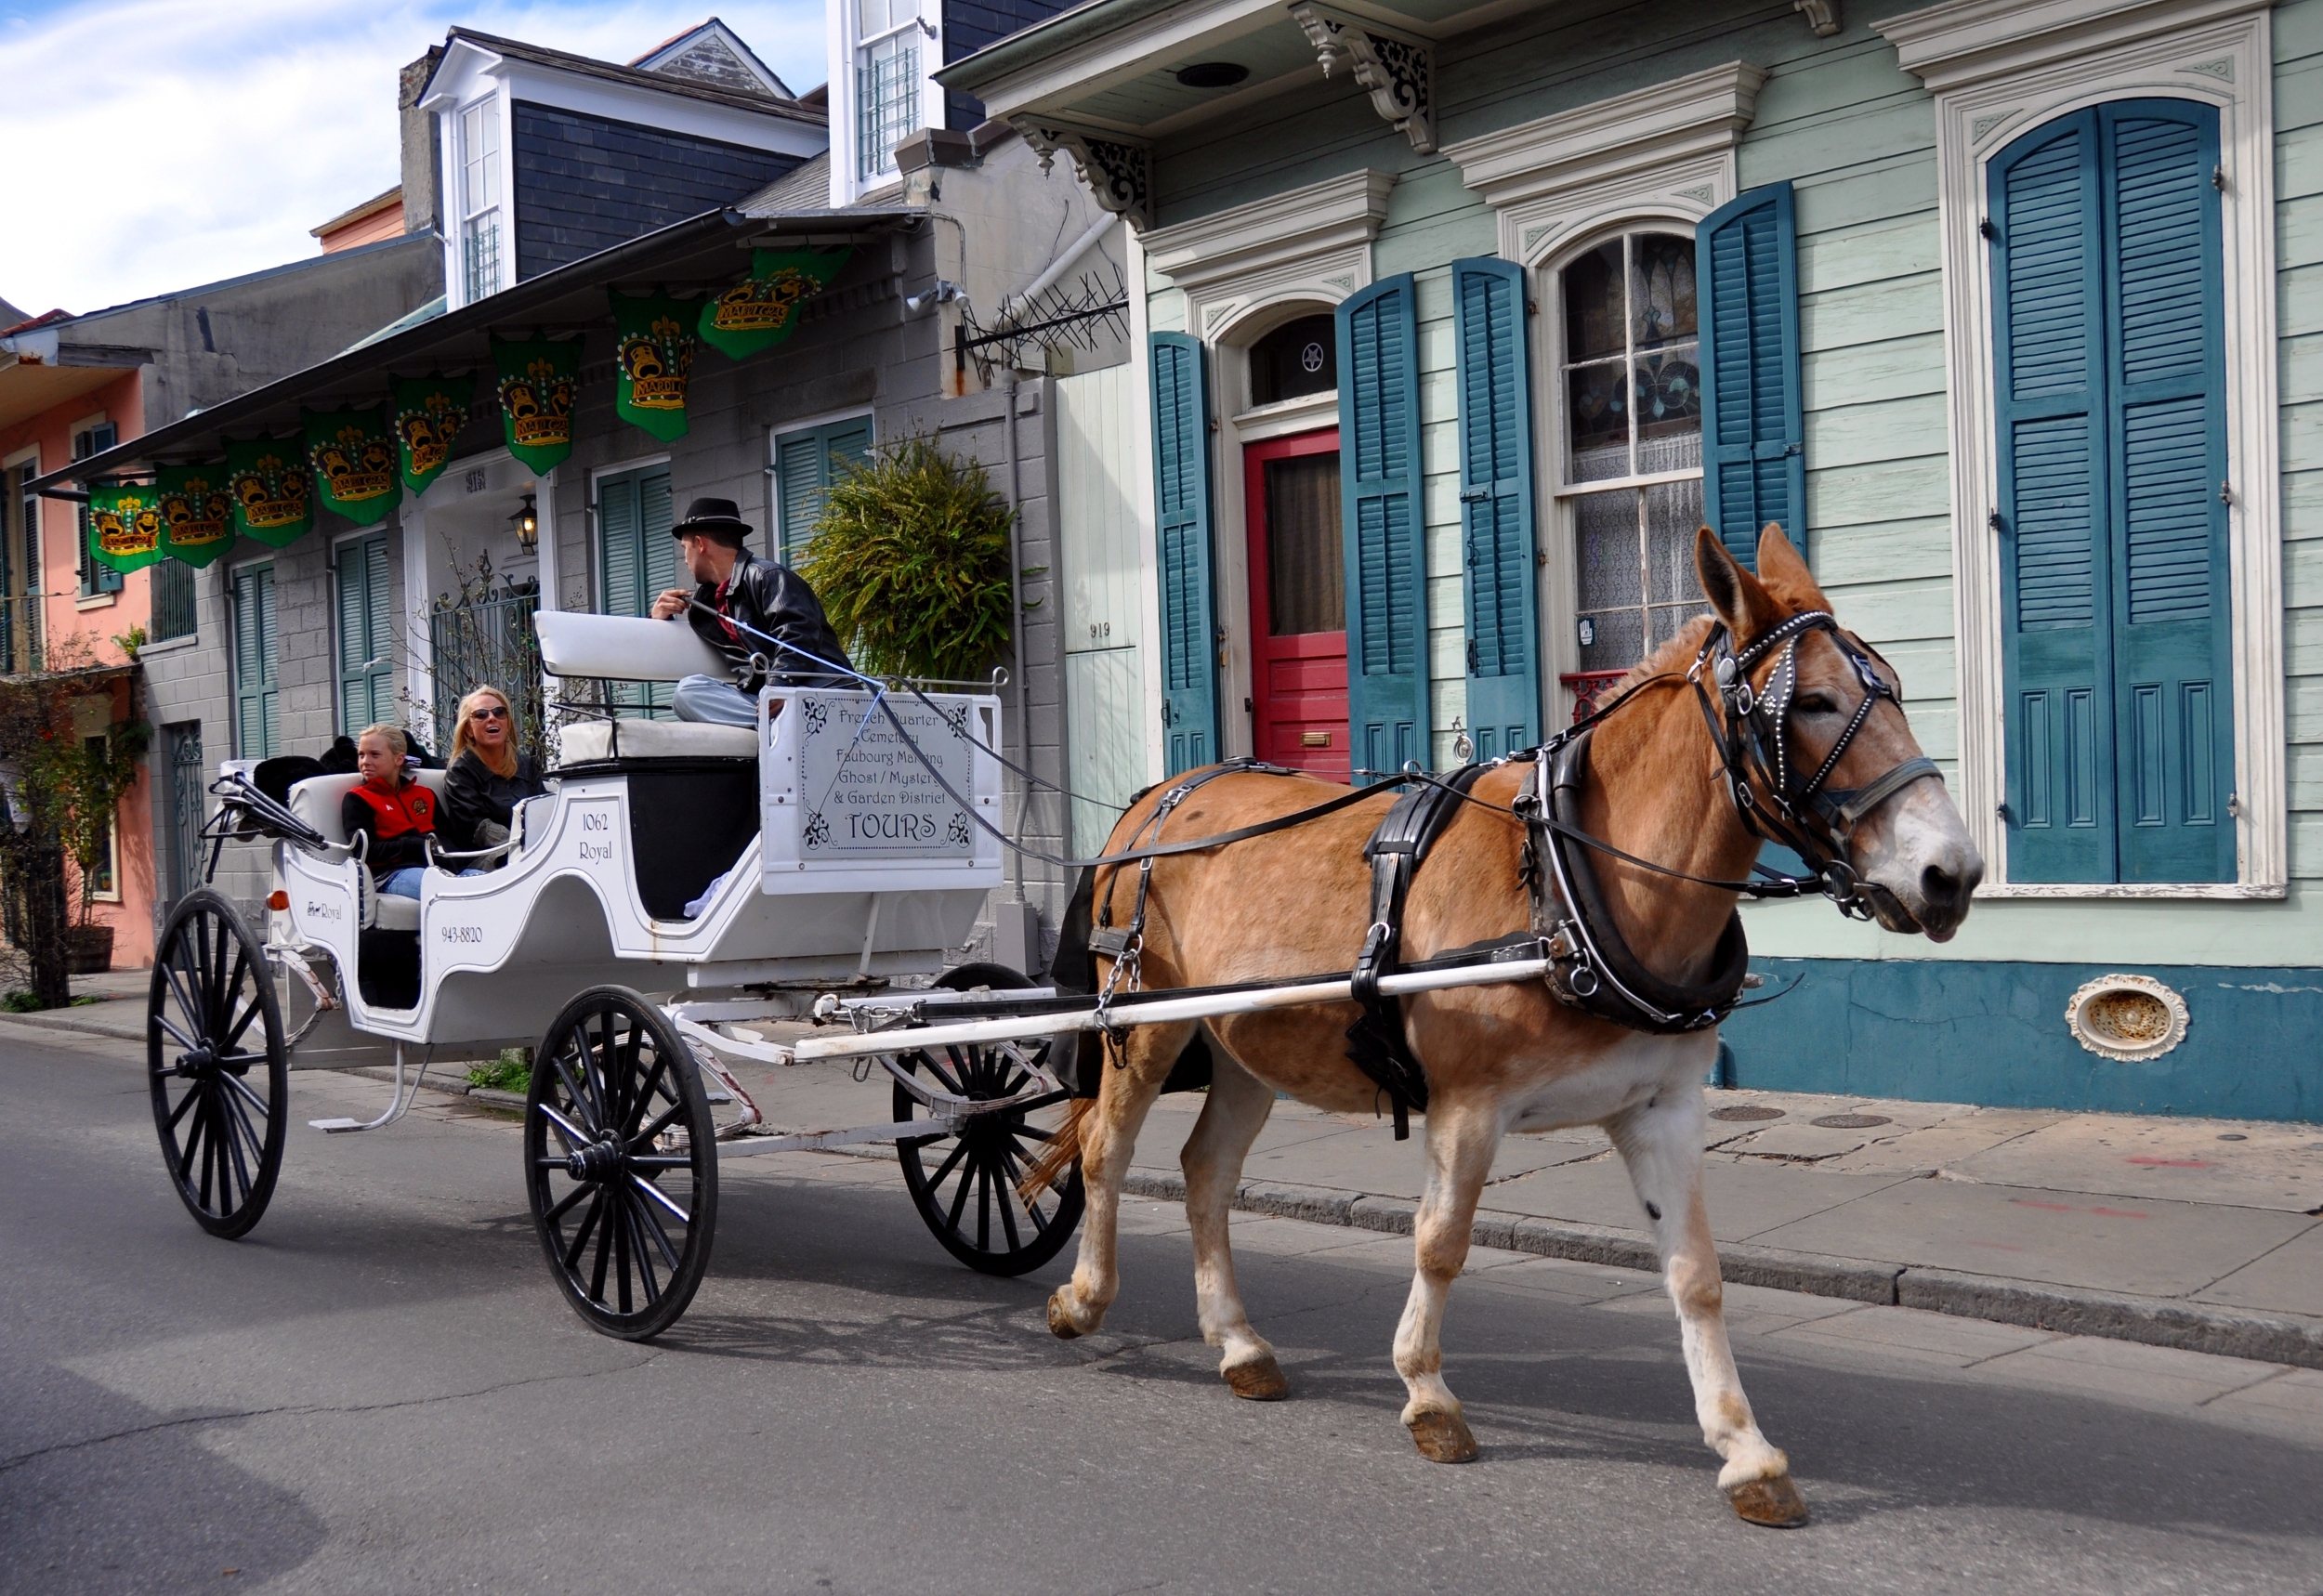 A horse cart in the city of New Orleans